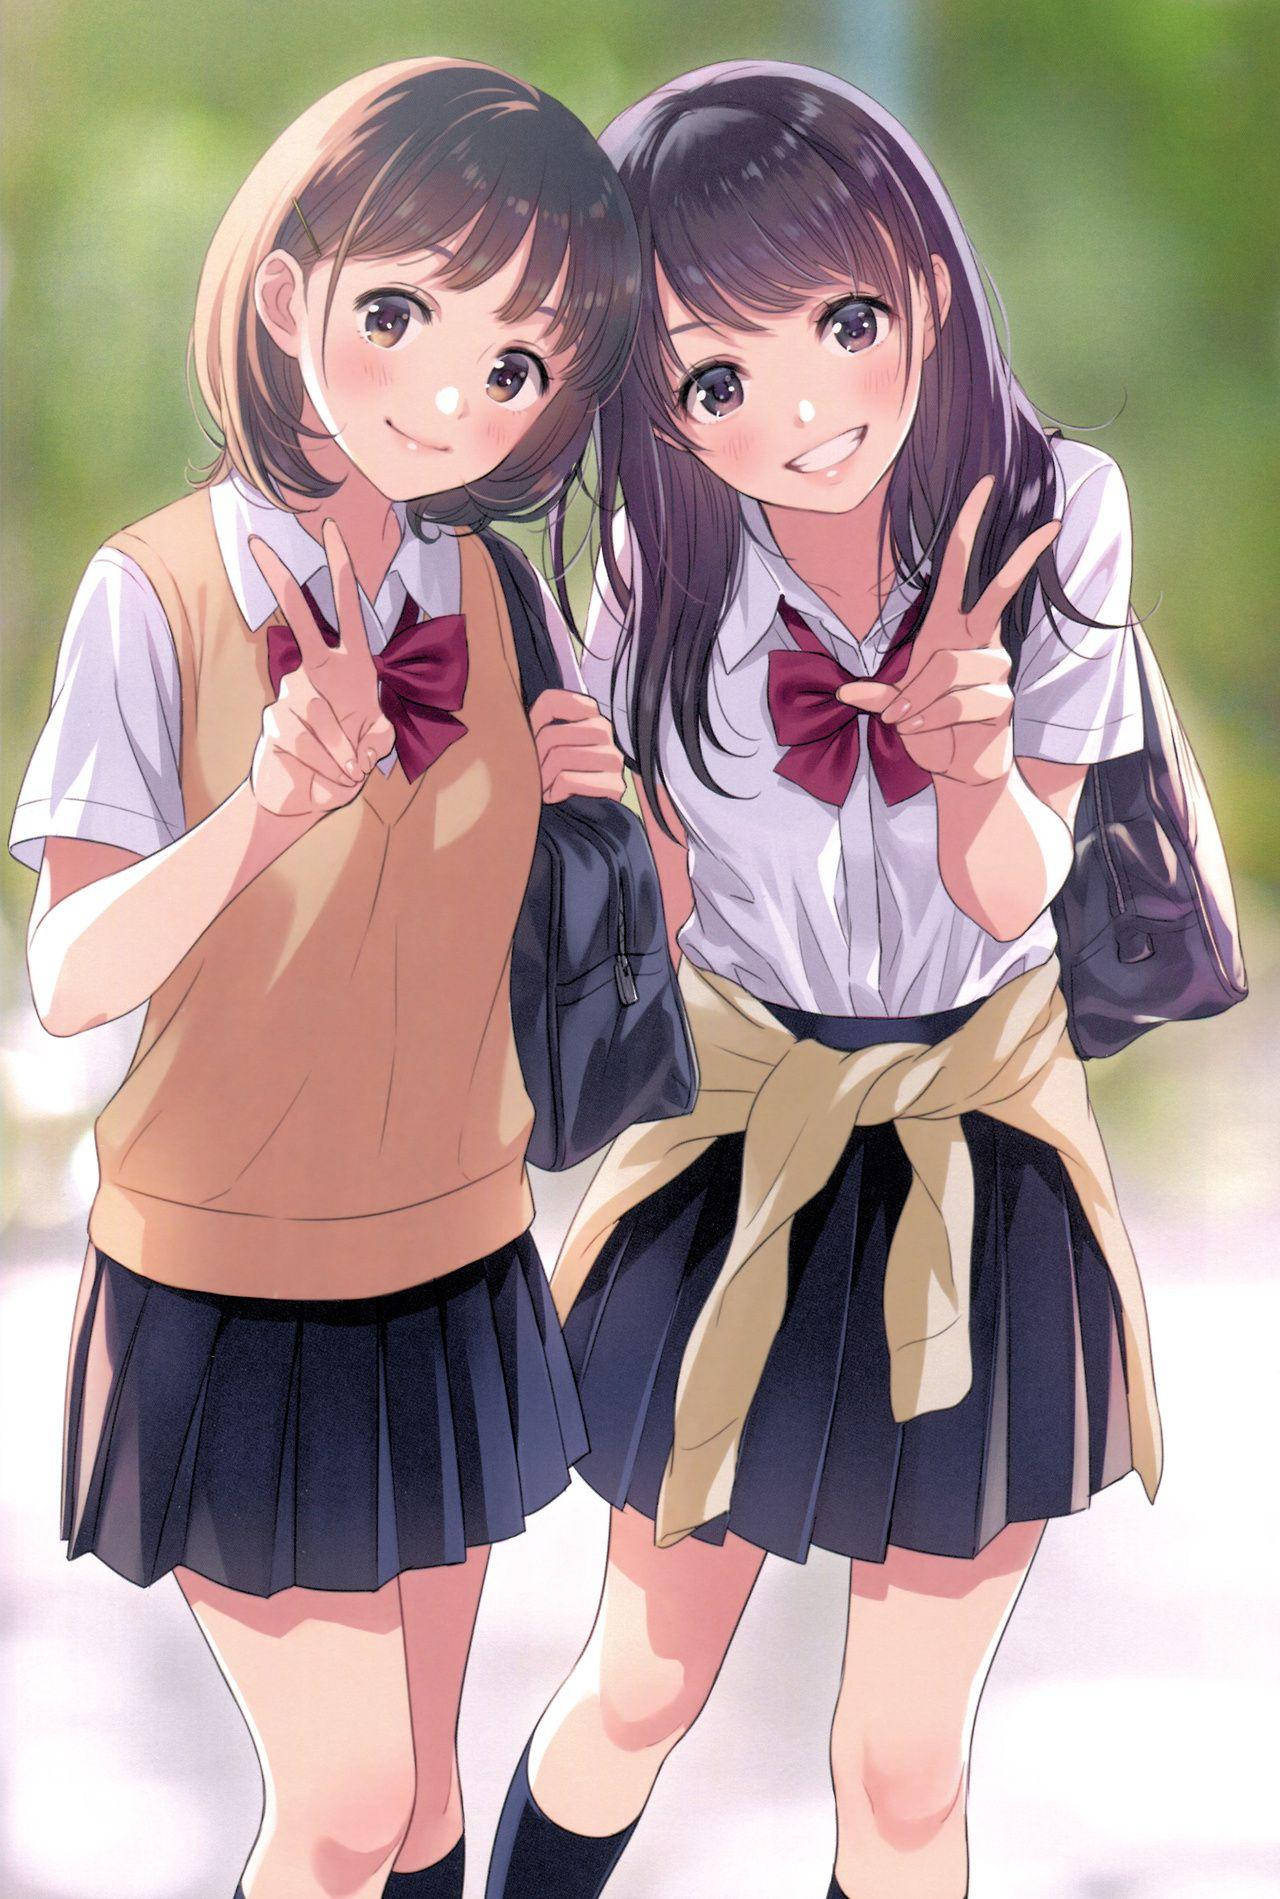 Matching Bff Anime Students Wallpaper